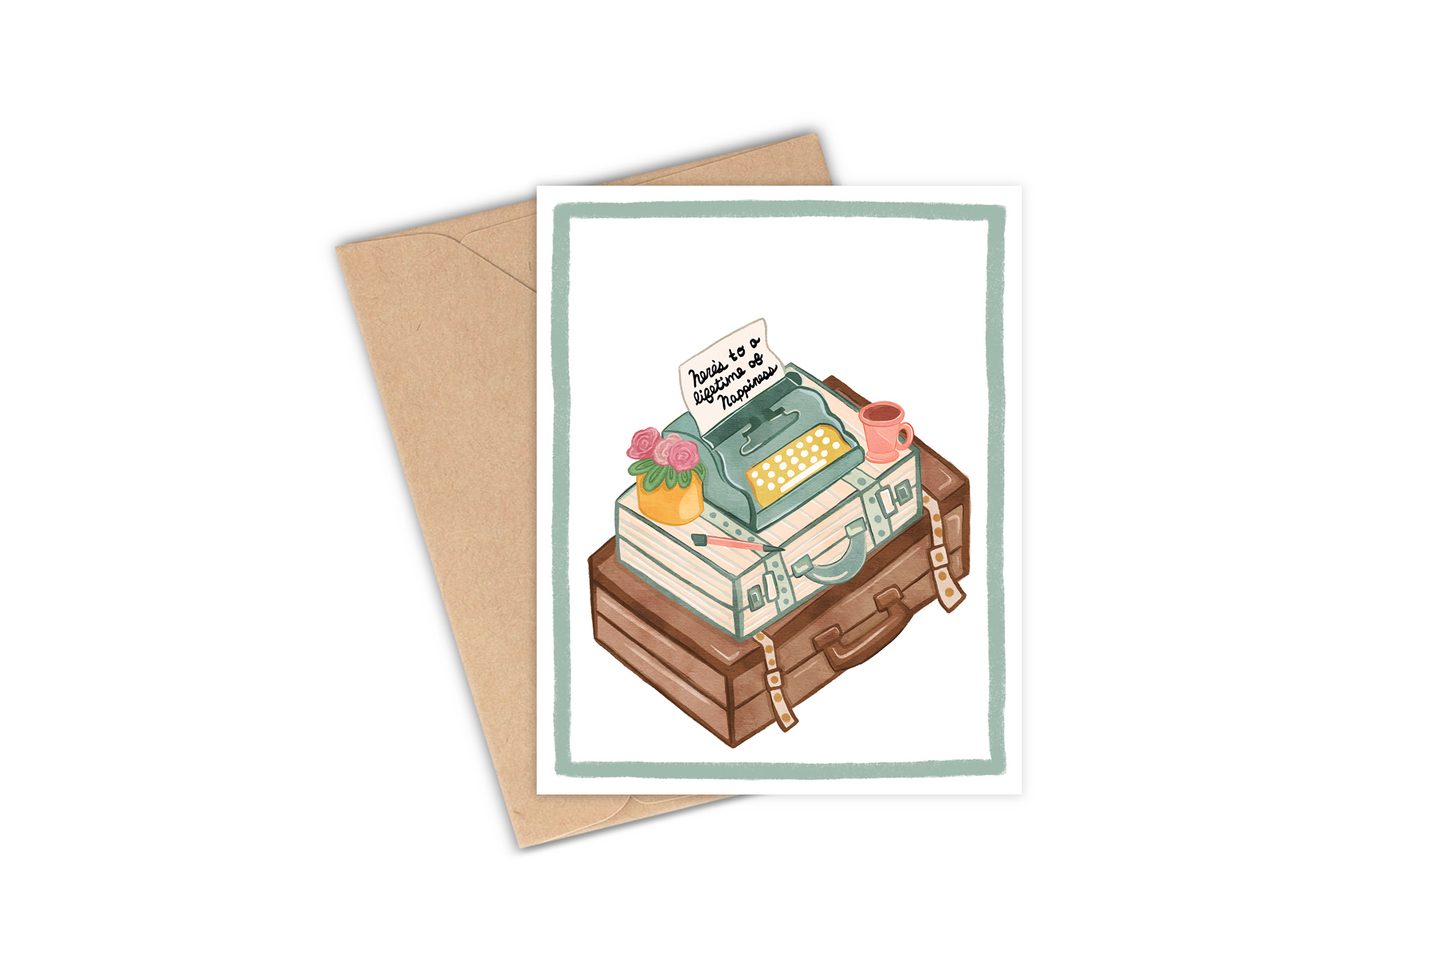 This card is perfect for any wedding, bridal shower, engagement, or anniversary!  Details: Hand-illustrated drawing of a stack of 2 vintage suitcases and a retro typewriter, a vase of flowers, a pencil, and a mug of coffee. The paper coming out of the typewriter says: "Here's to a lifetime of happiness".